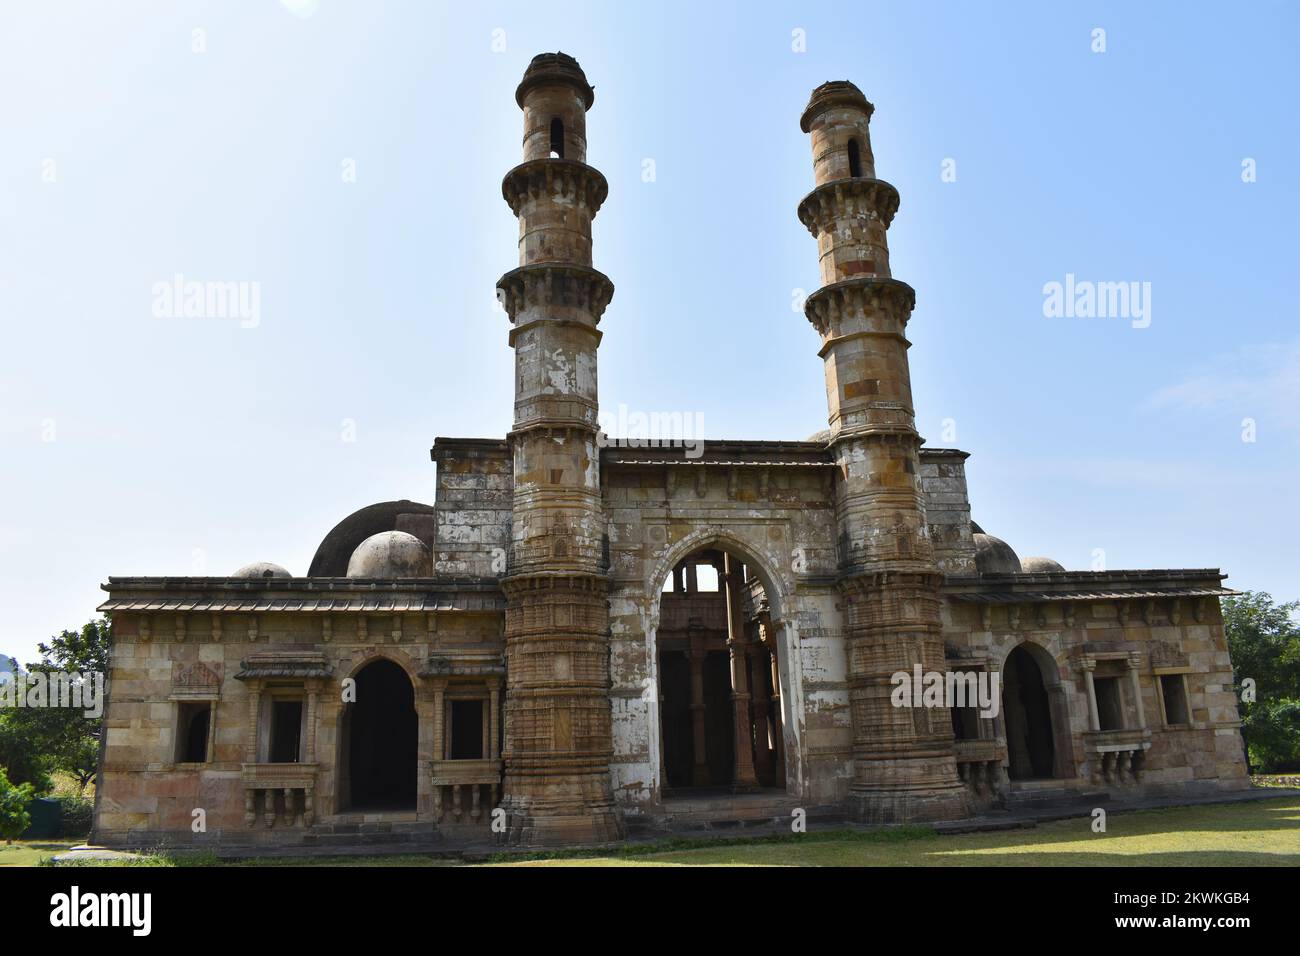 Kevda Masjid, façade, built in stone and carvings details of architecture, an Islamic monument was built by Sultan Mahmud Begada 15th - 16th century. Stock Photo